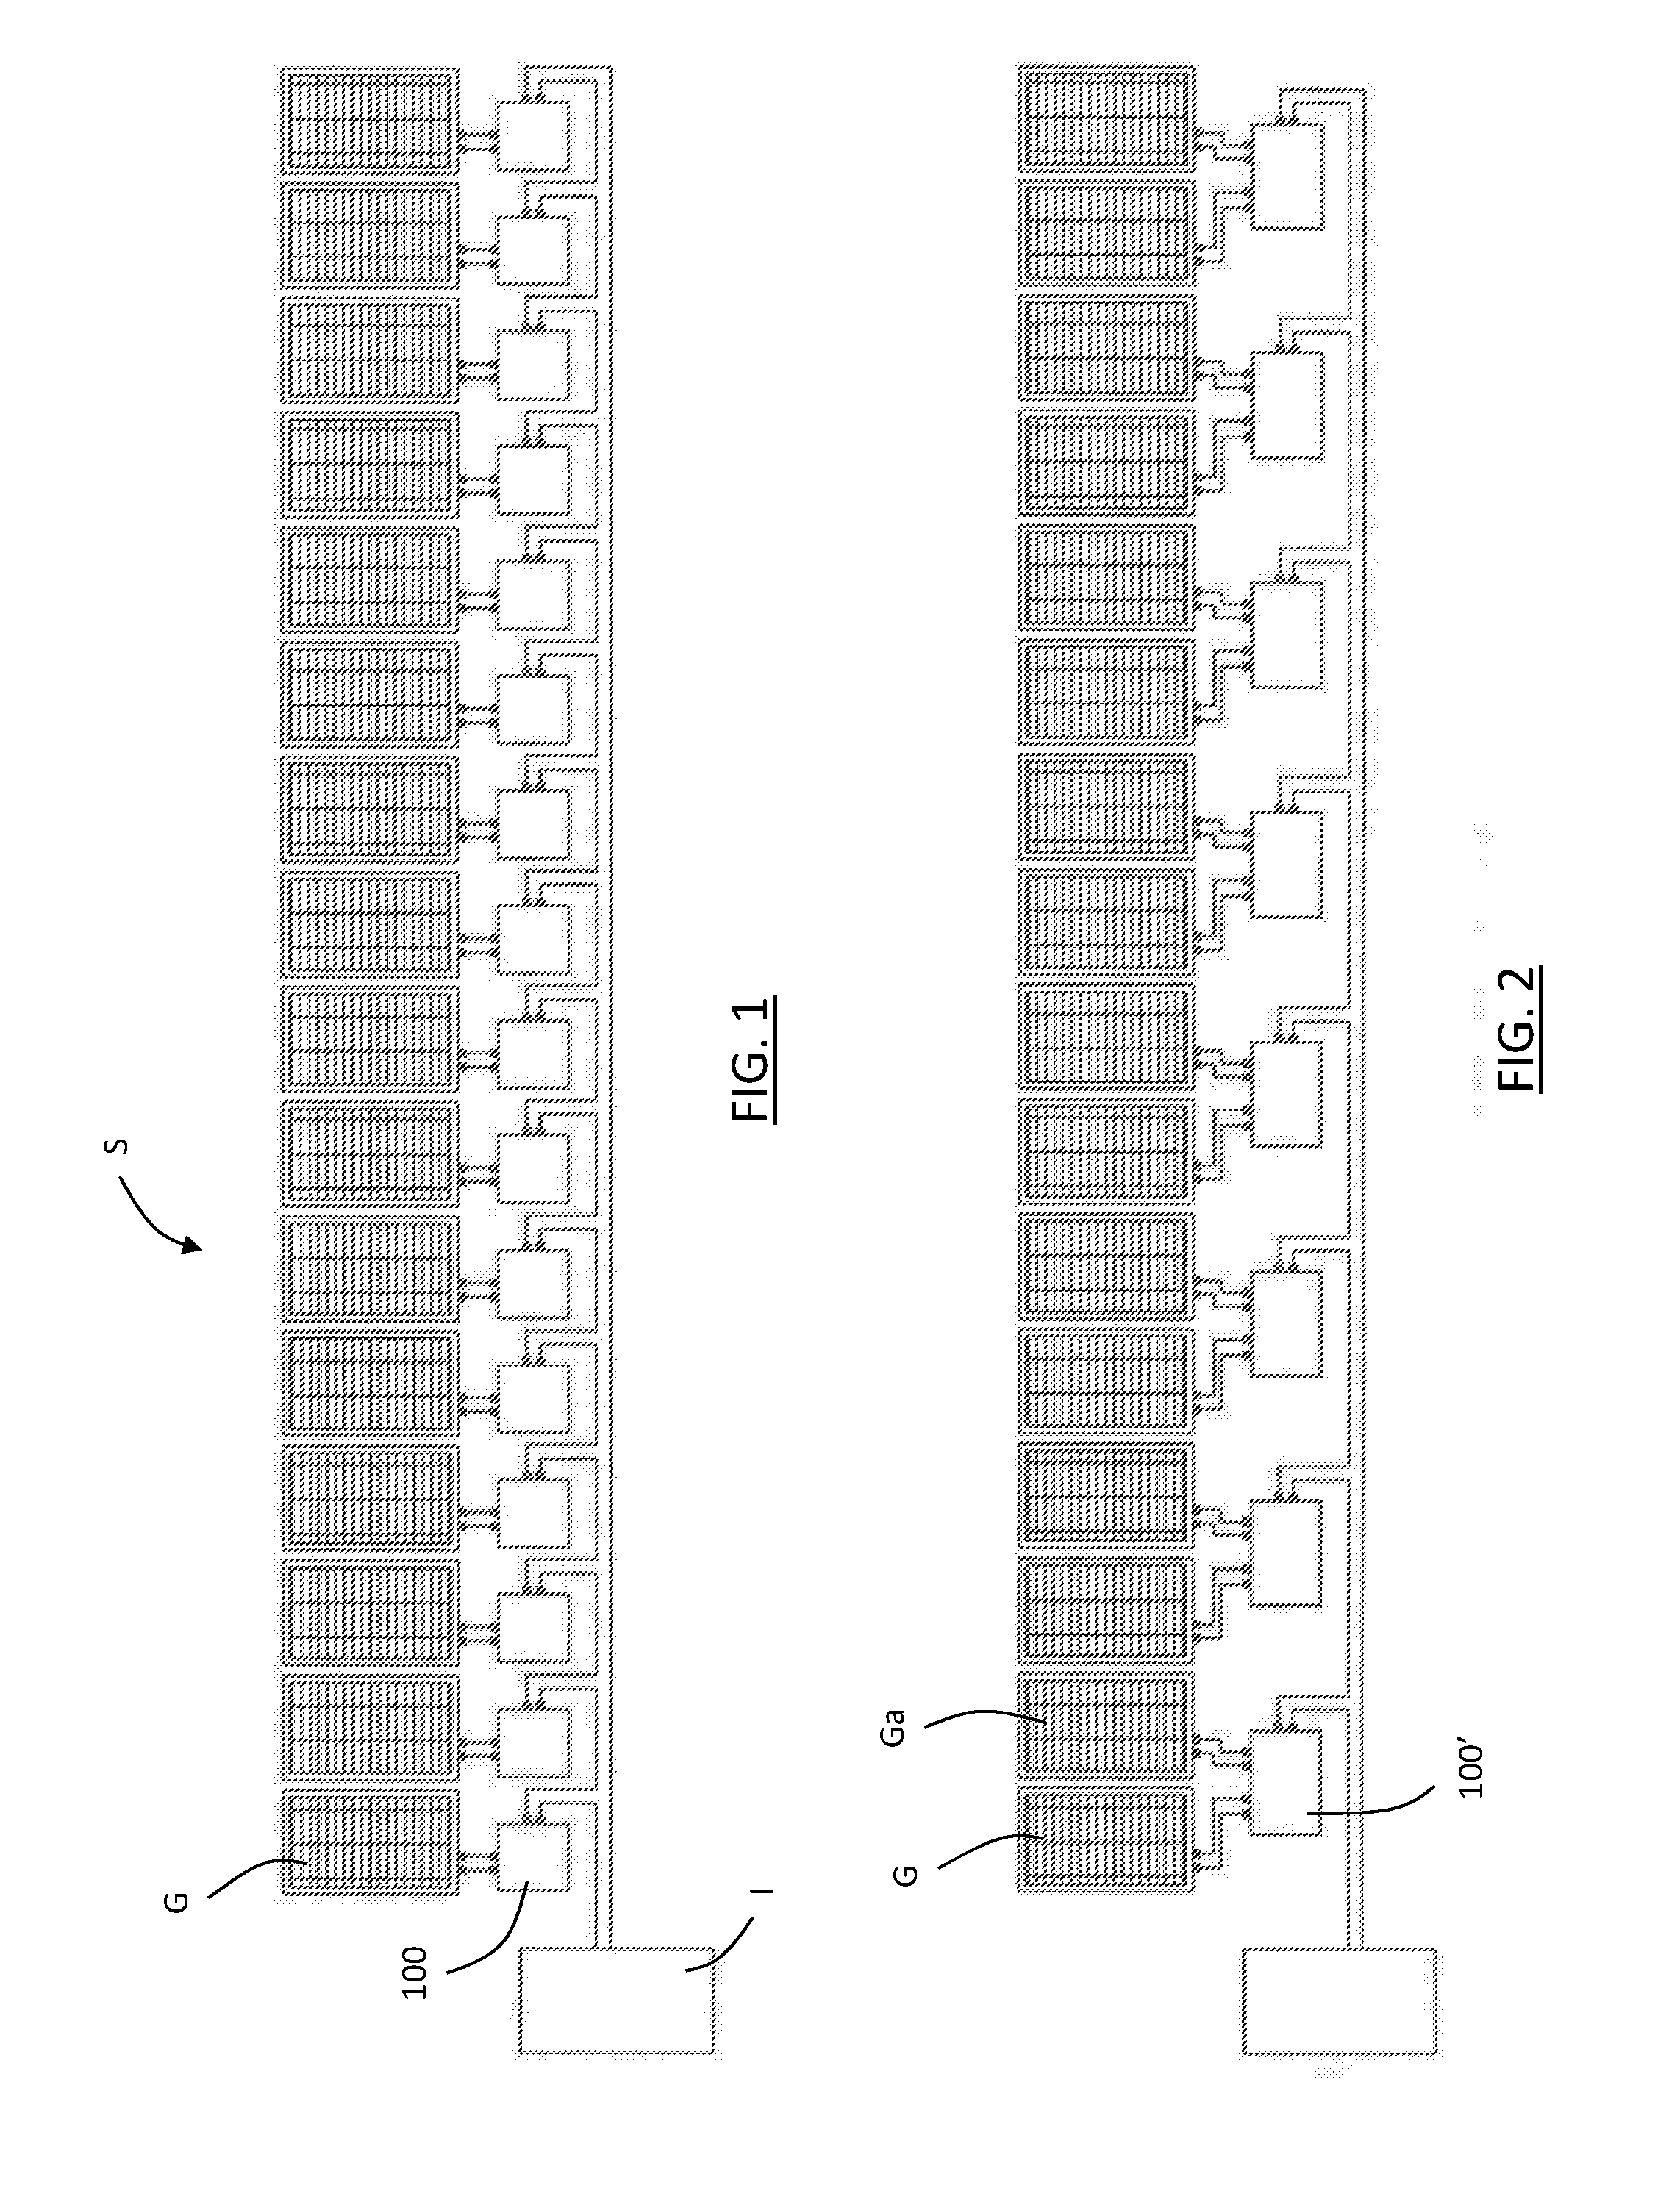 Device and method for optimization of power harvested from solar panels